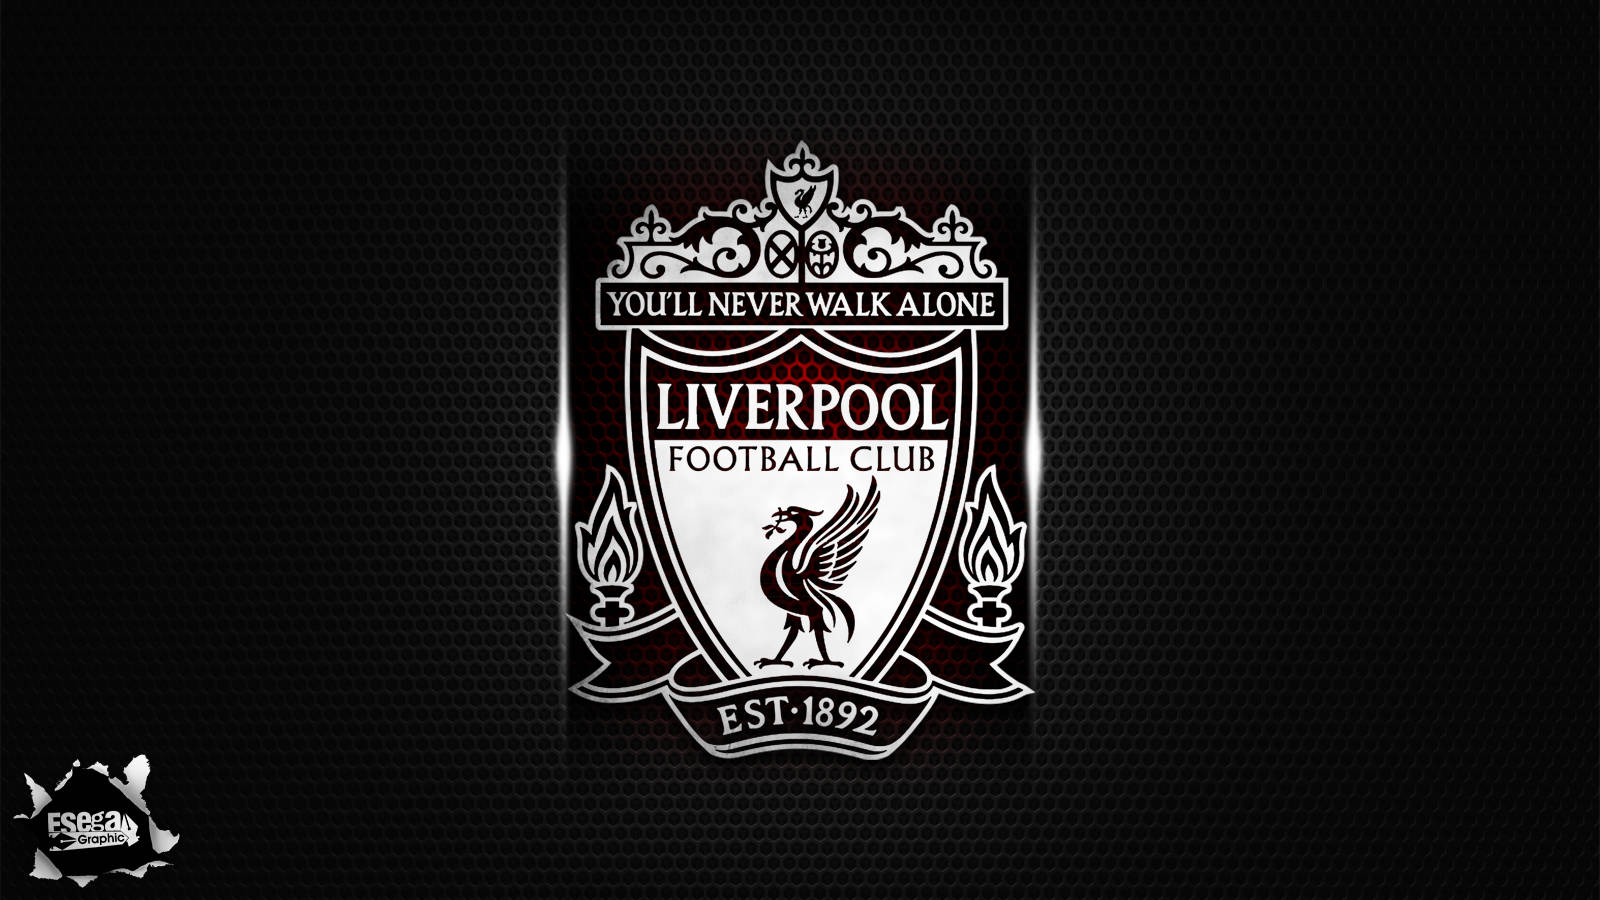 Founded in 1892, Liverpool Football Club dominates Anfield Stadium Wallpaper